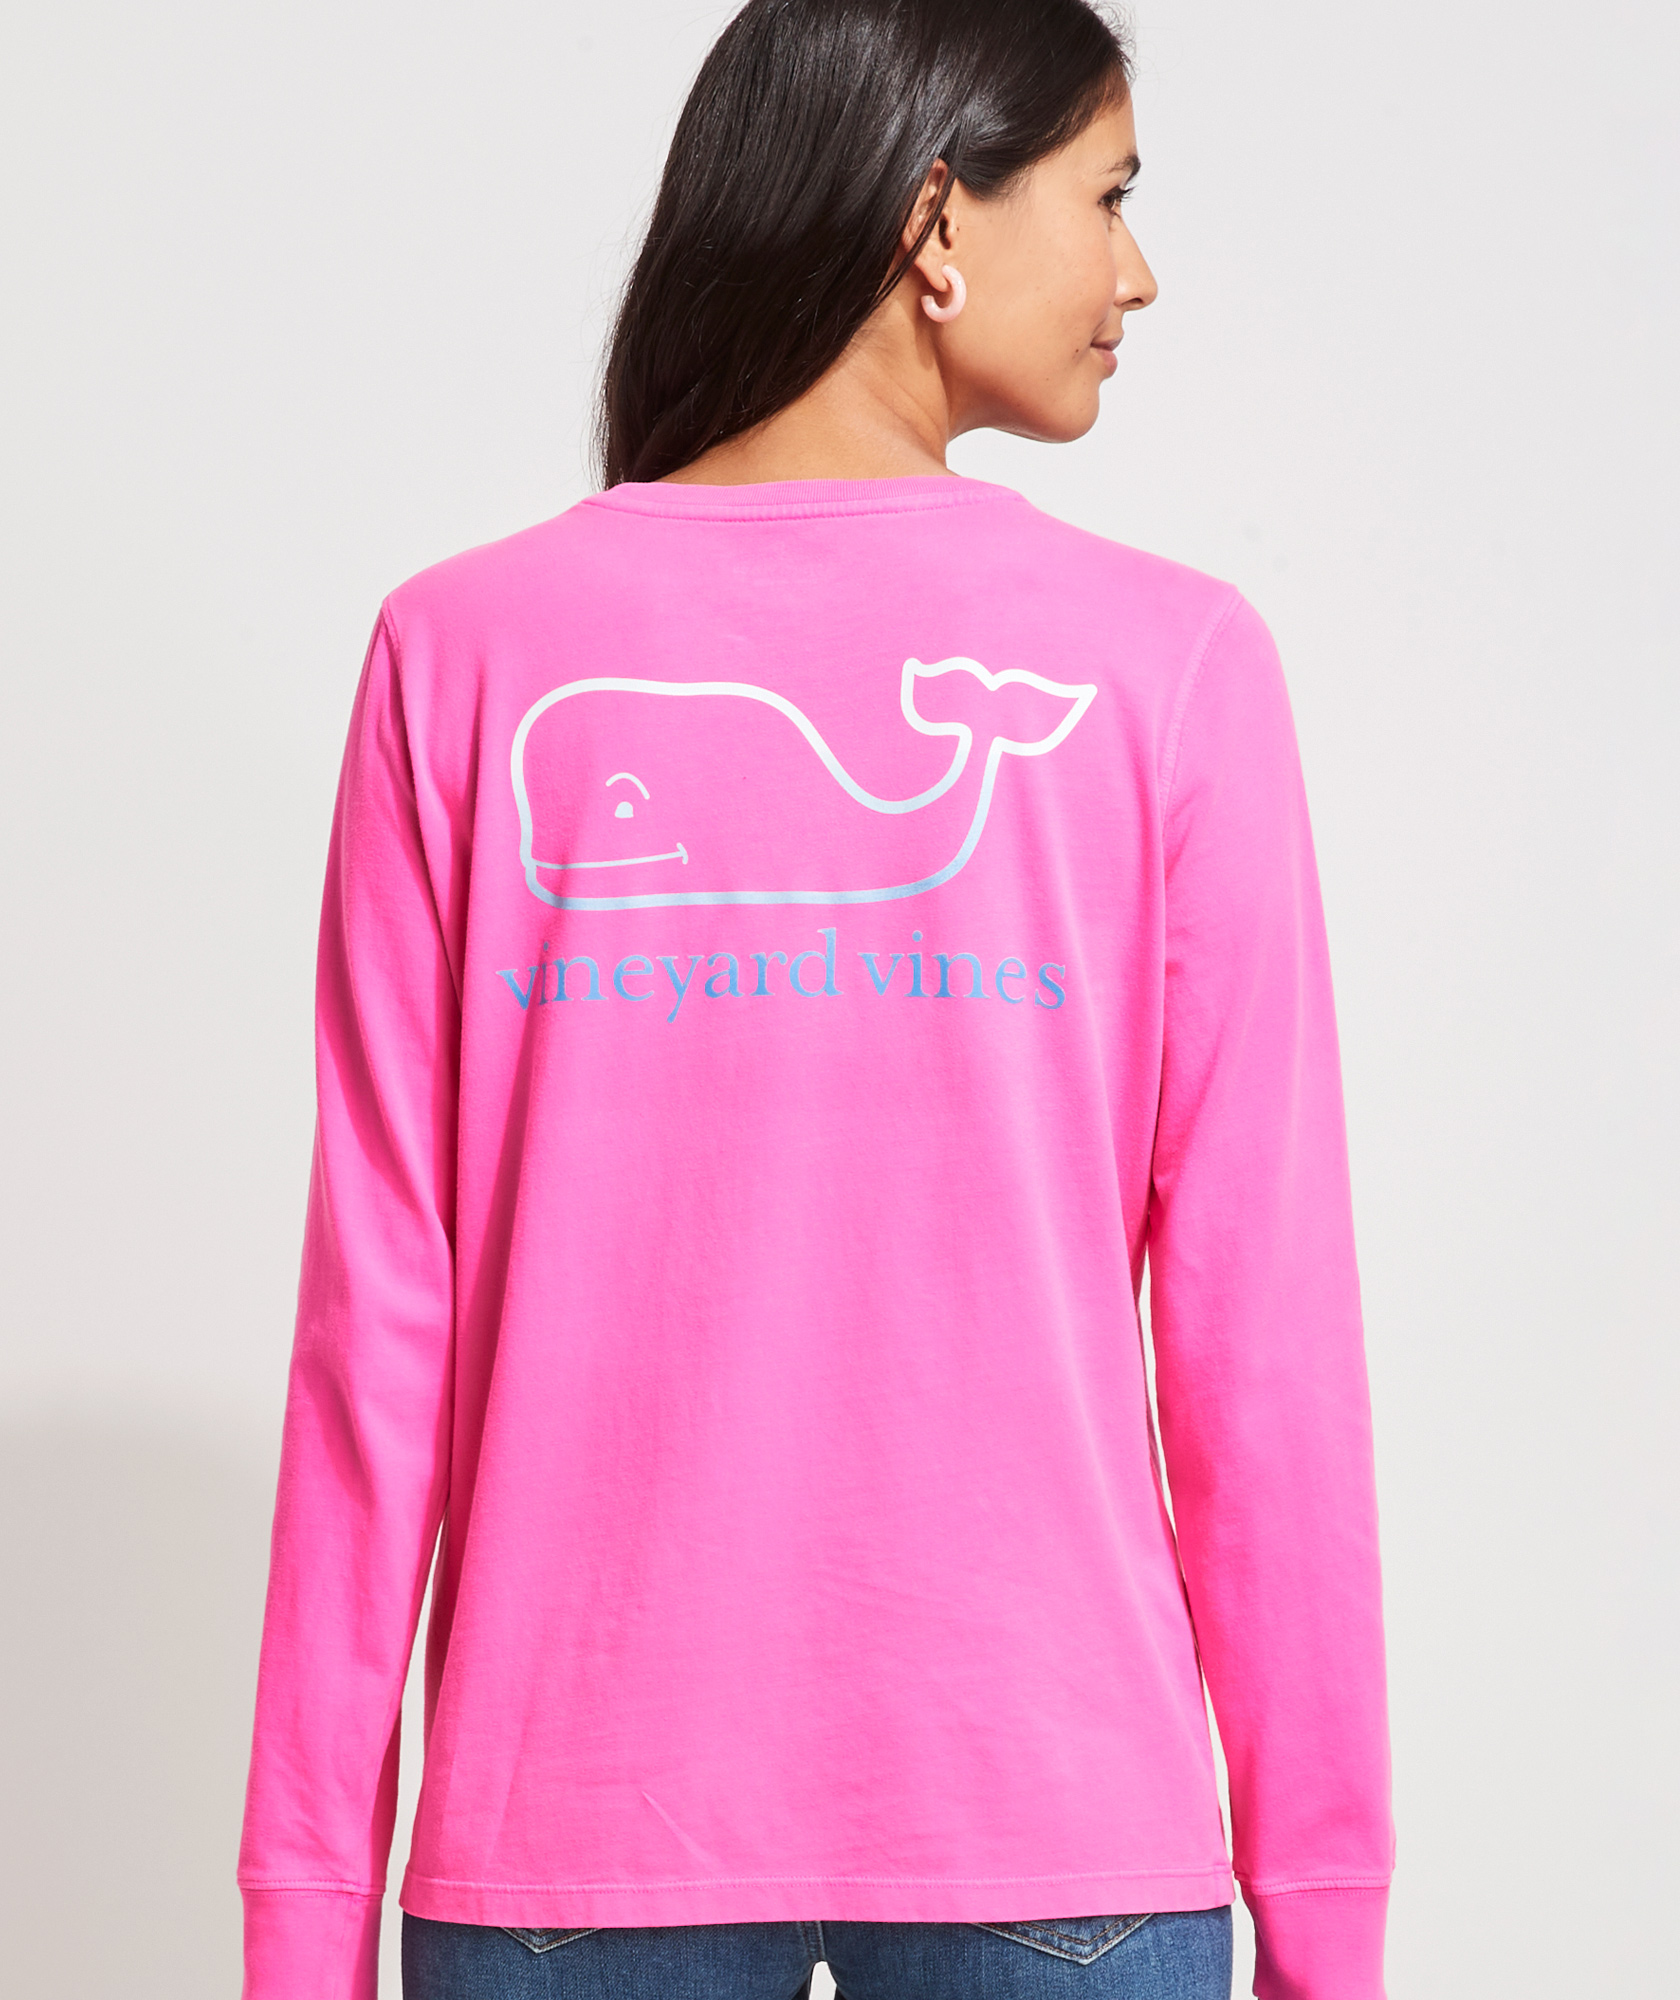 Shop Ombre Whale Long-Sleeve Pocket Tee at vineyard vines